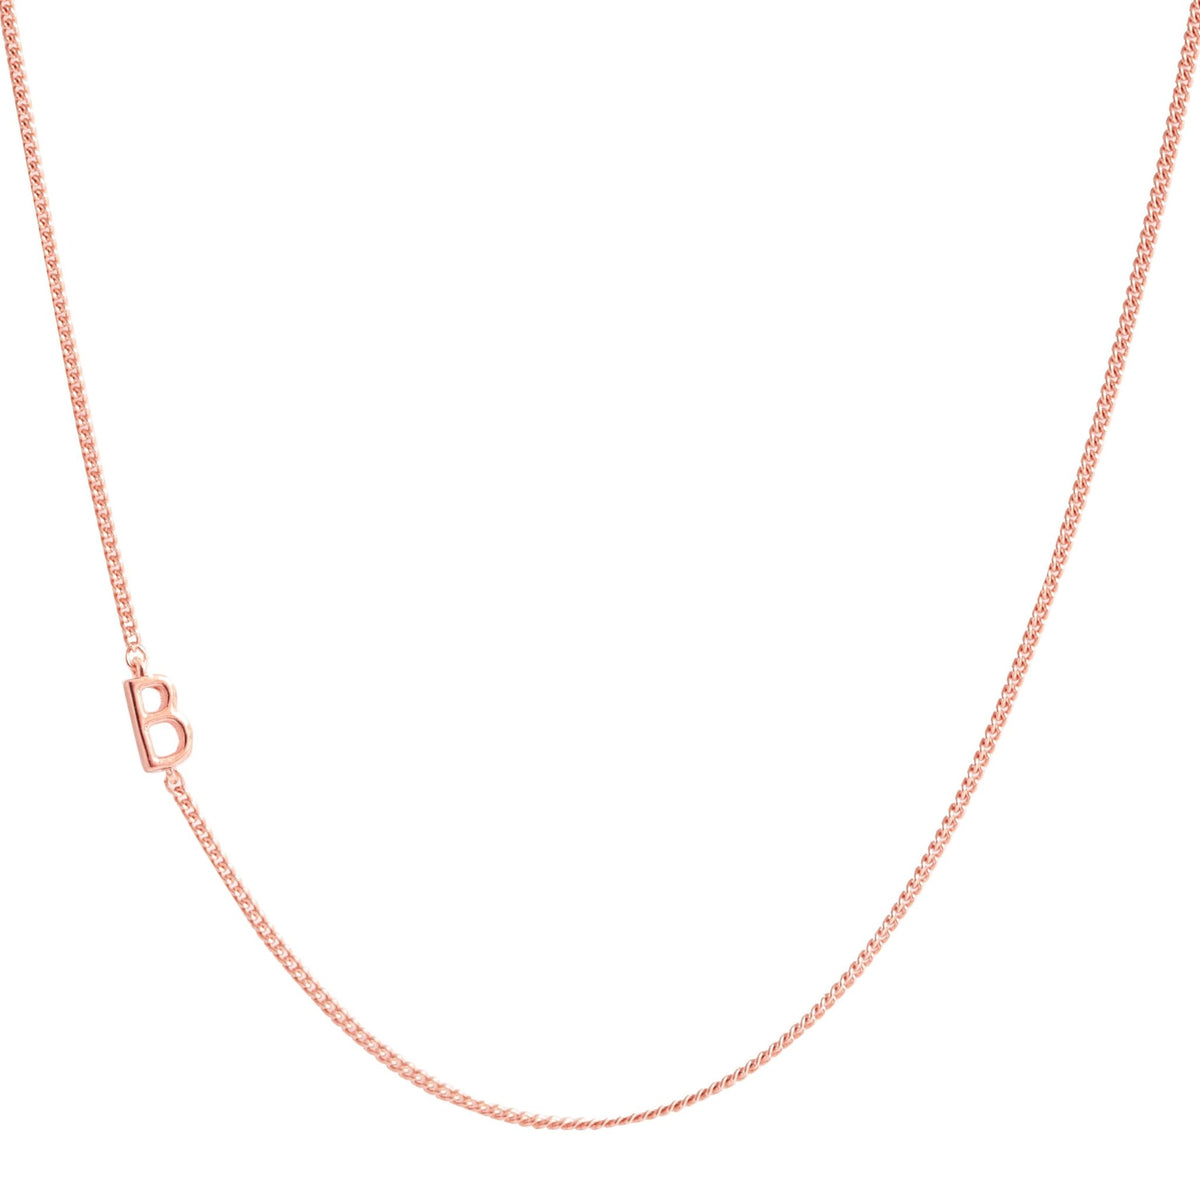 NOTABLE OFFSET INITIAL NECKLACE - B - GOLD, ROSE GOLD, OR SILVER - SO PRETTY CARA COTTER